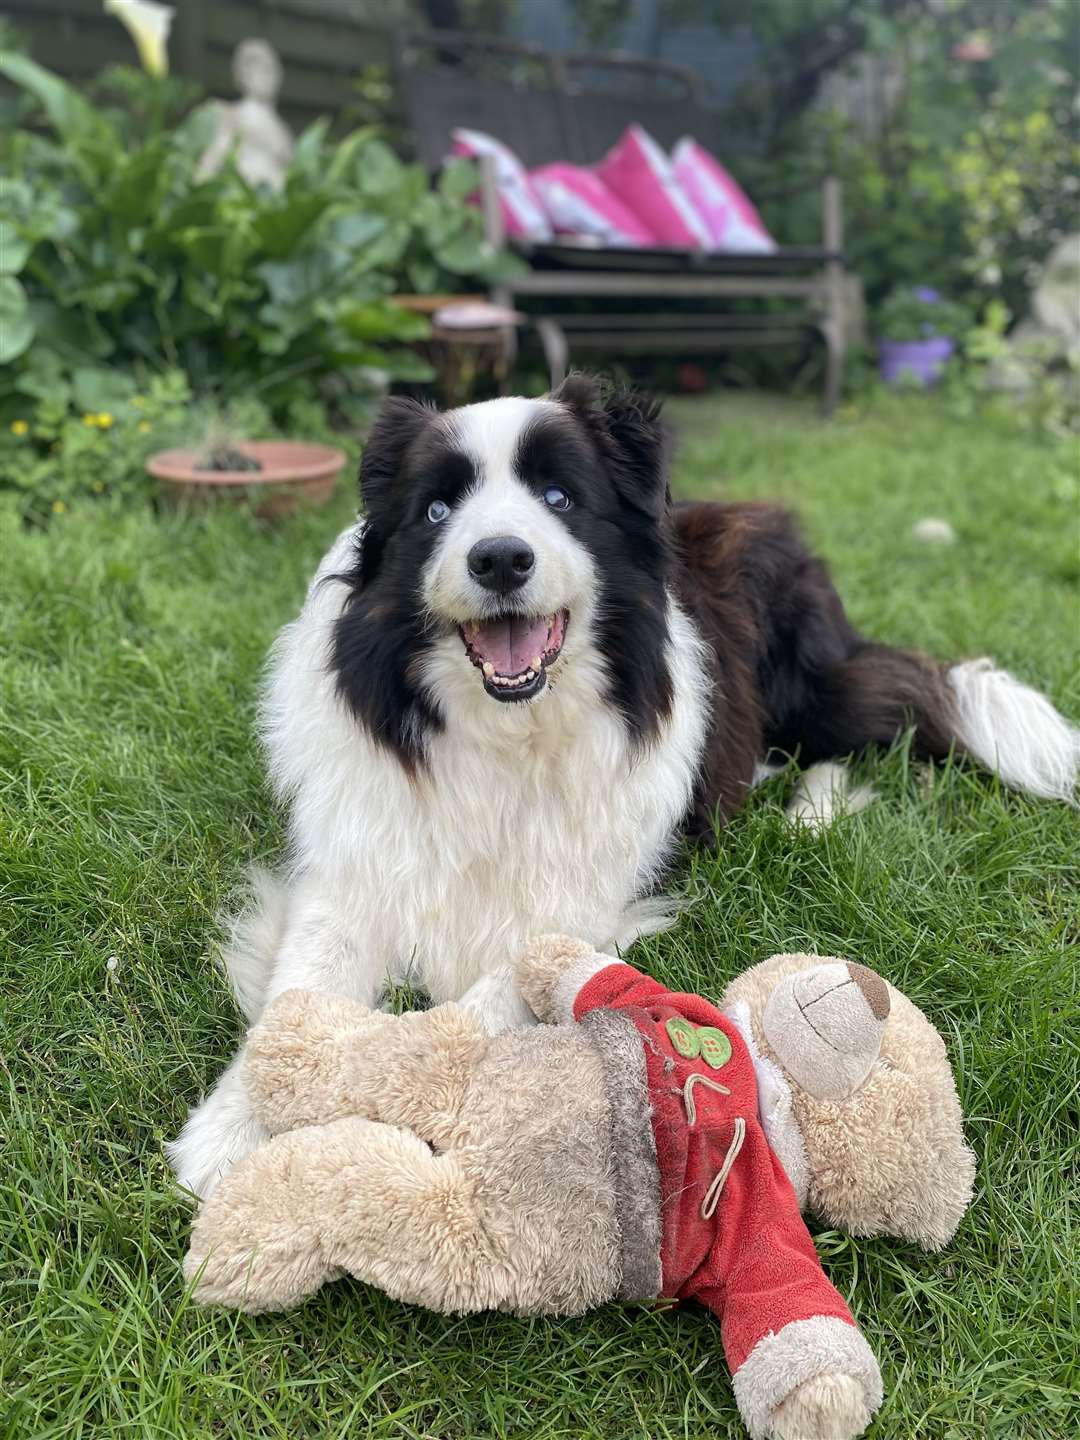 Even though Joe is blind he loves playing fetch with his teddies